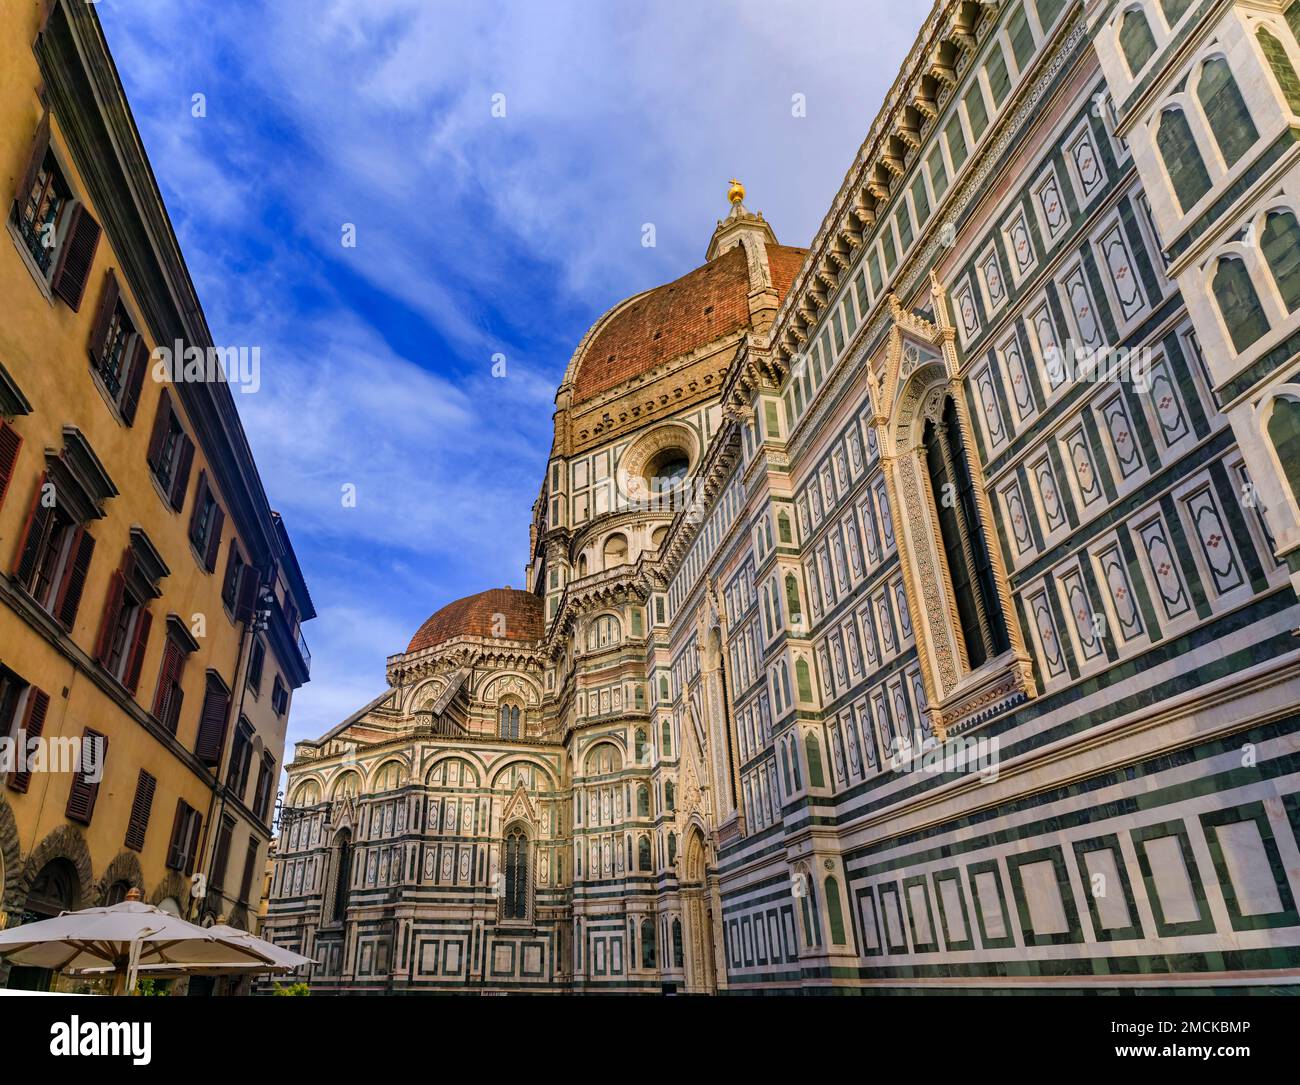 Ornate colorful marble facade of the Duomo Cathedral or Cattedrale di Santa Maria del Fiore, Florence, Italy known for the red tiled Brunelleschi dome Stock Photo